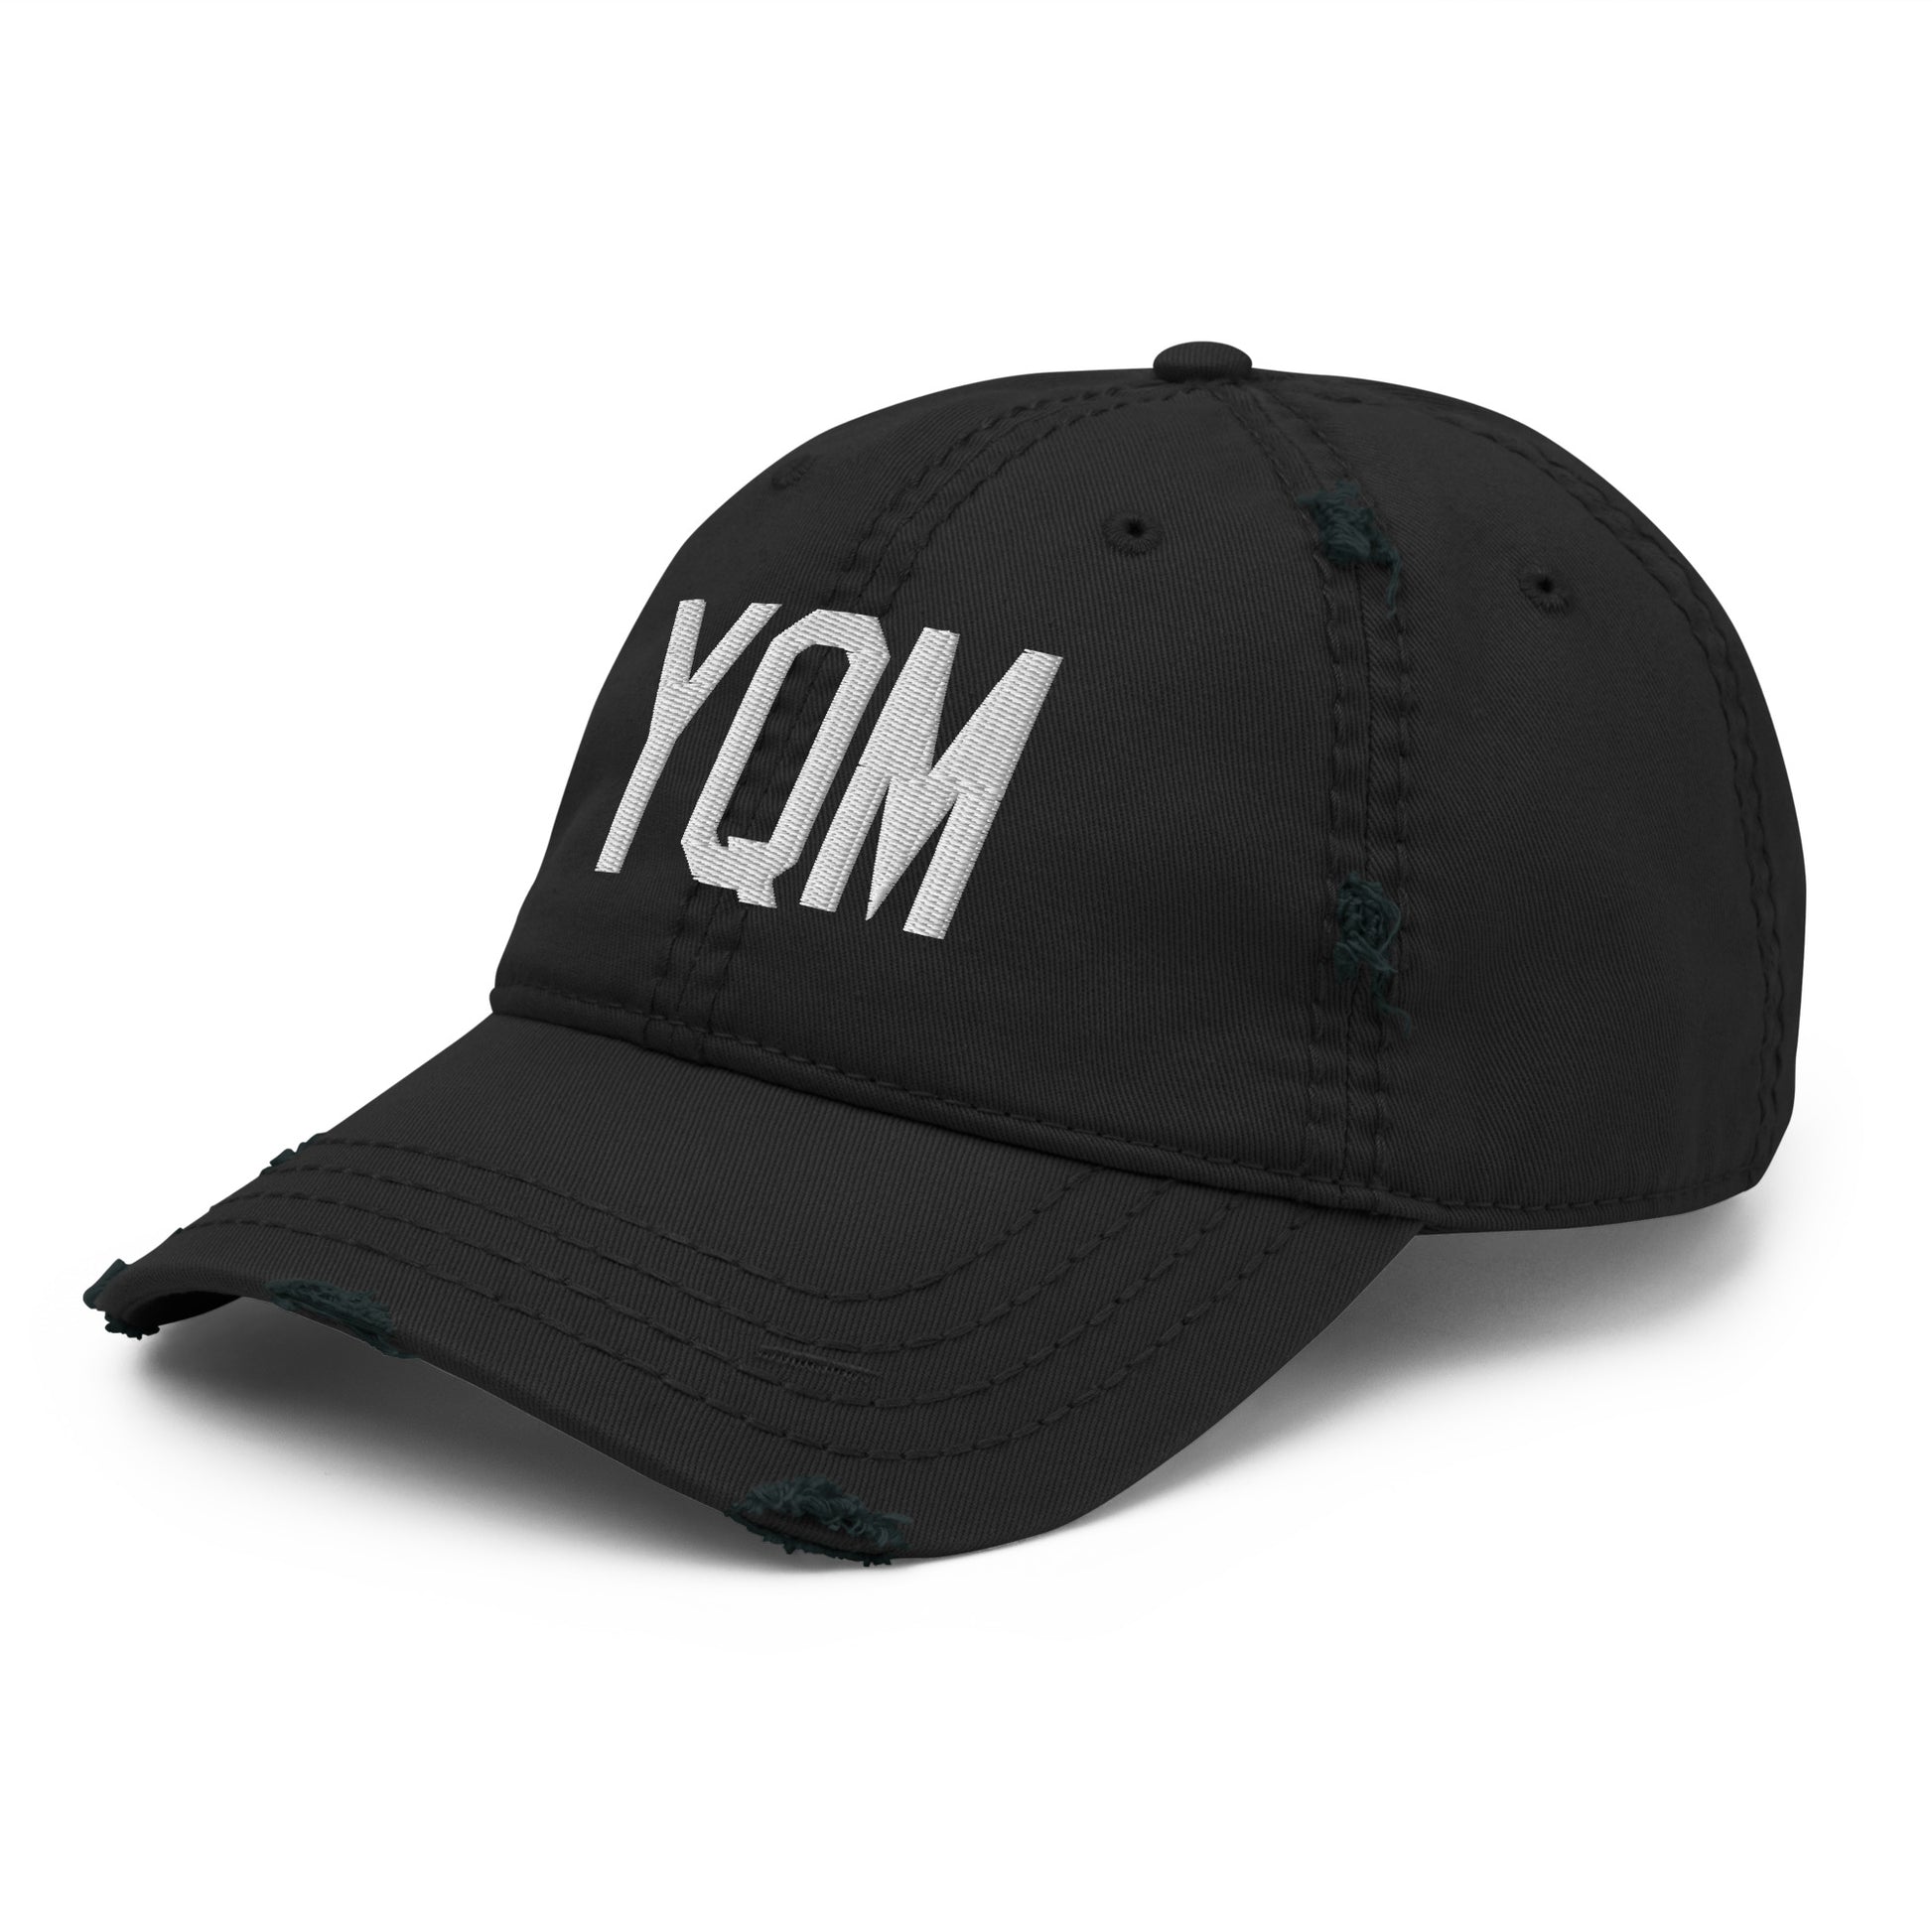 Airport Code Distressed Hat - White • YQM Moncton • YHM Designs - Image 11